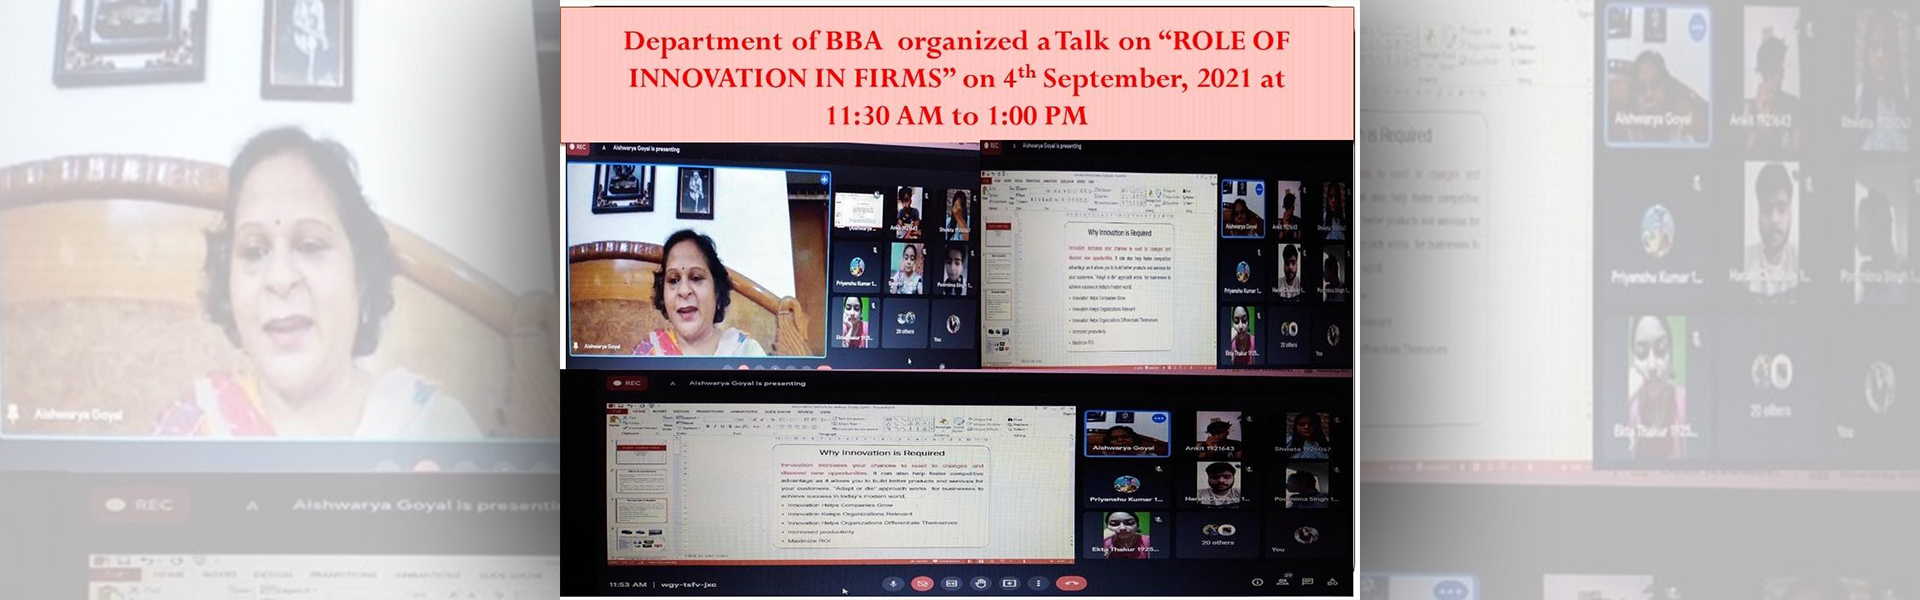 BBA Department Talk on Role of Innovation in Firms 